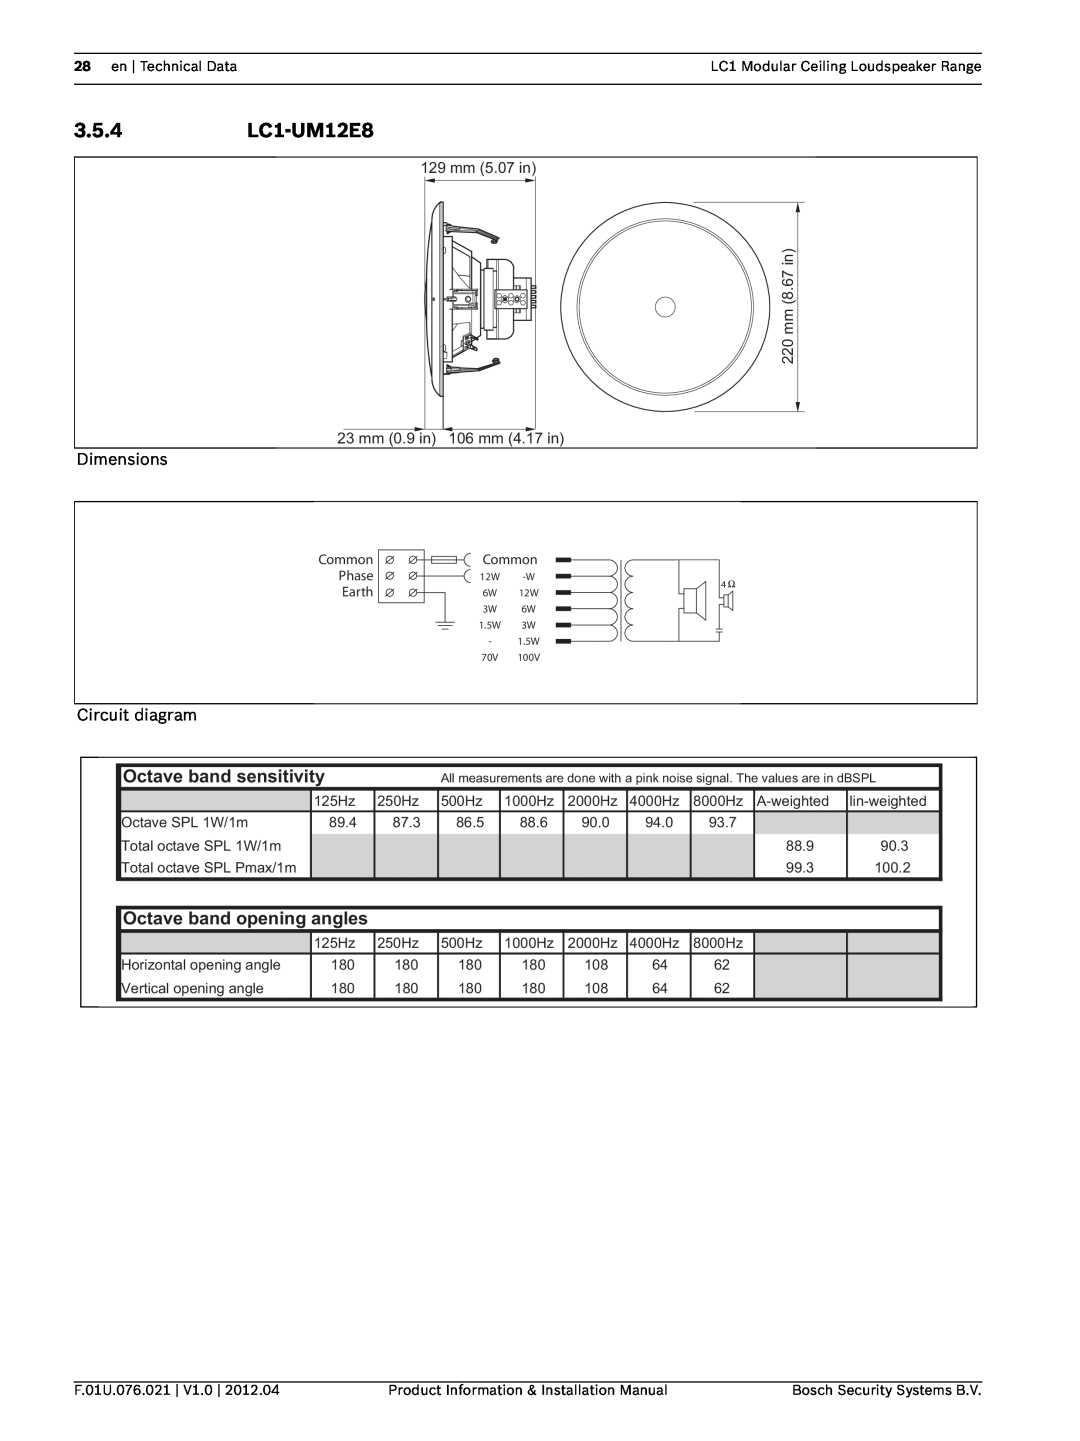 Bosch Appliances installation manual 3.5.4LC1-UM12E8, Octave band sensitivity, Octave band opening angles 